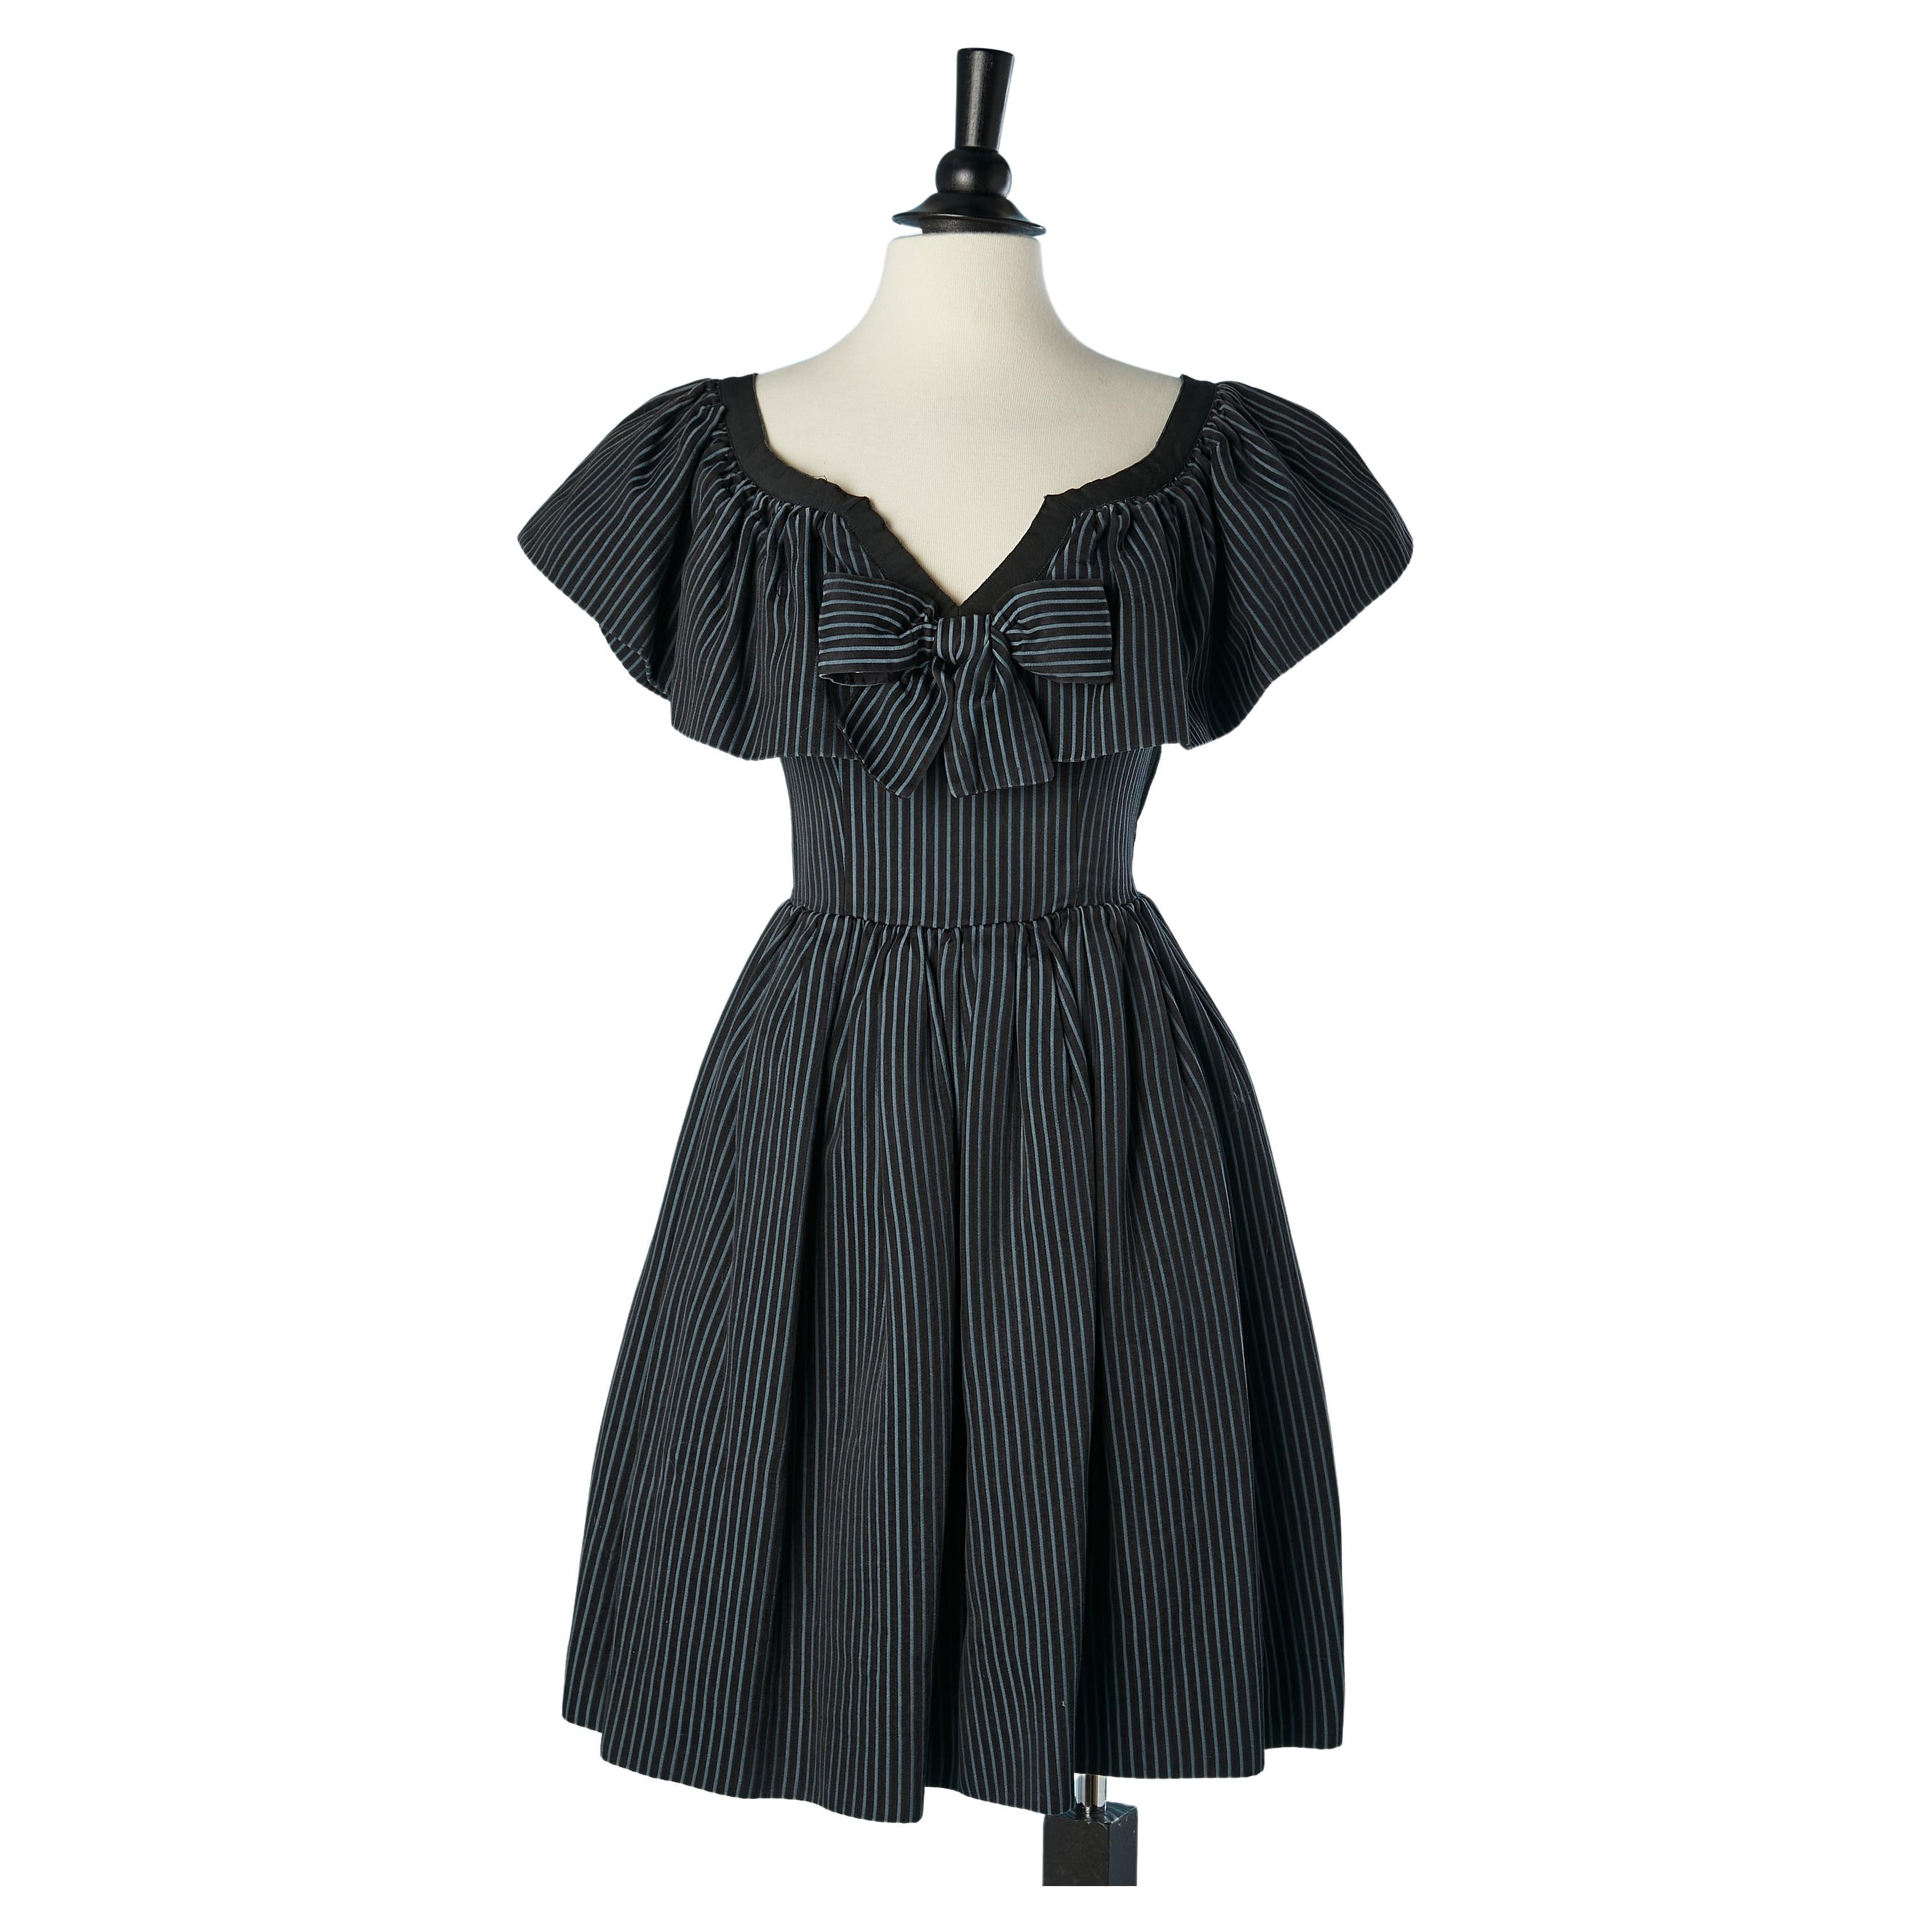 Black cotton dress with blue stripes, ruffles and bow YSL Rive Gauche  For Sale